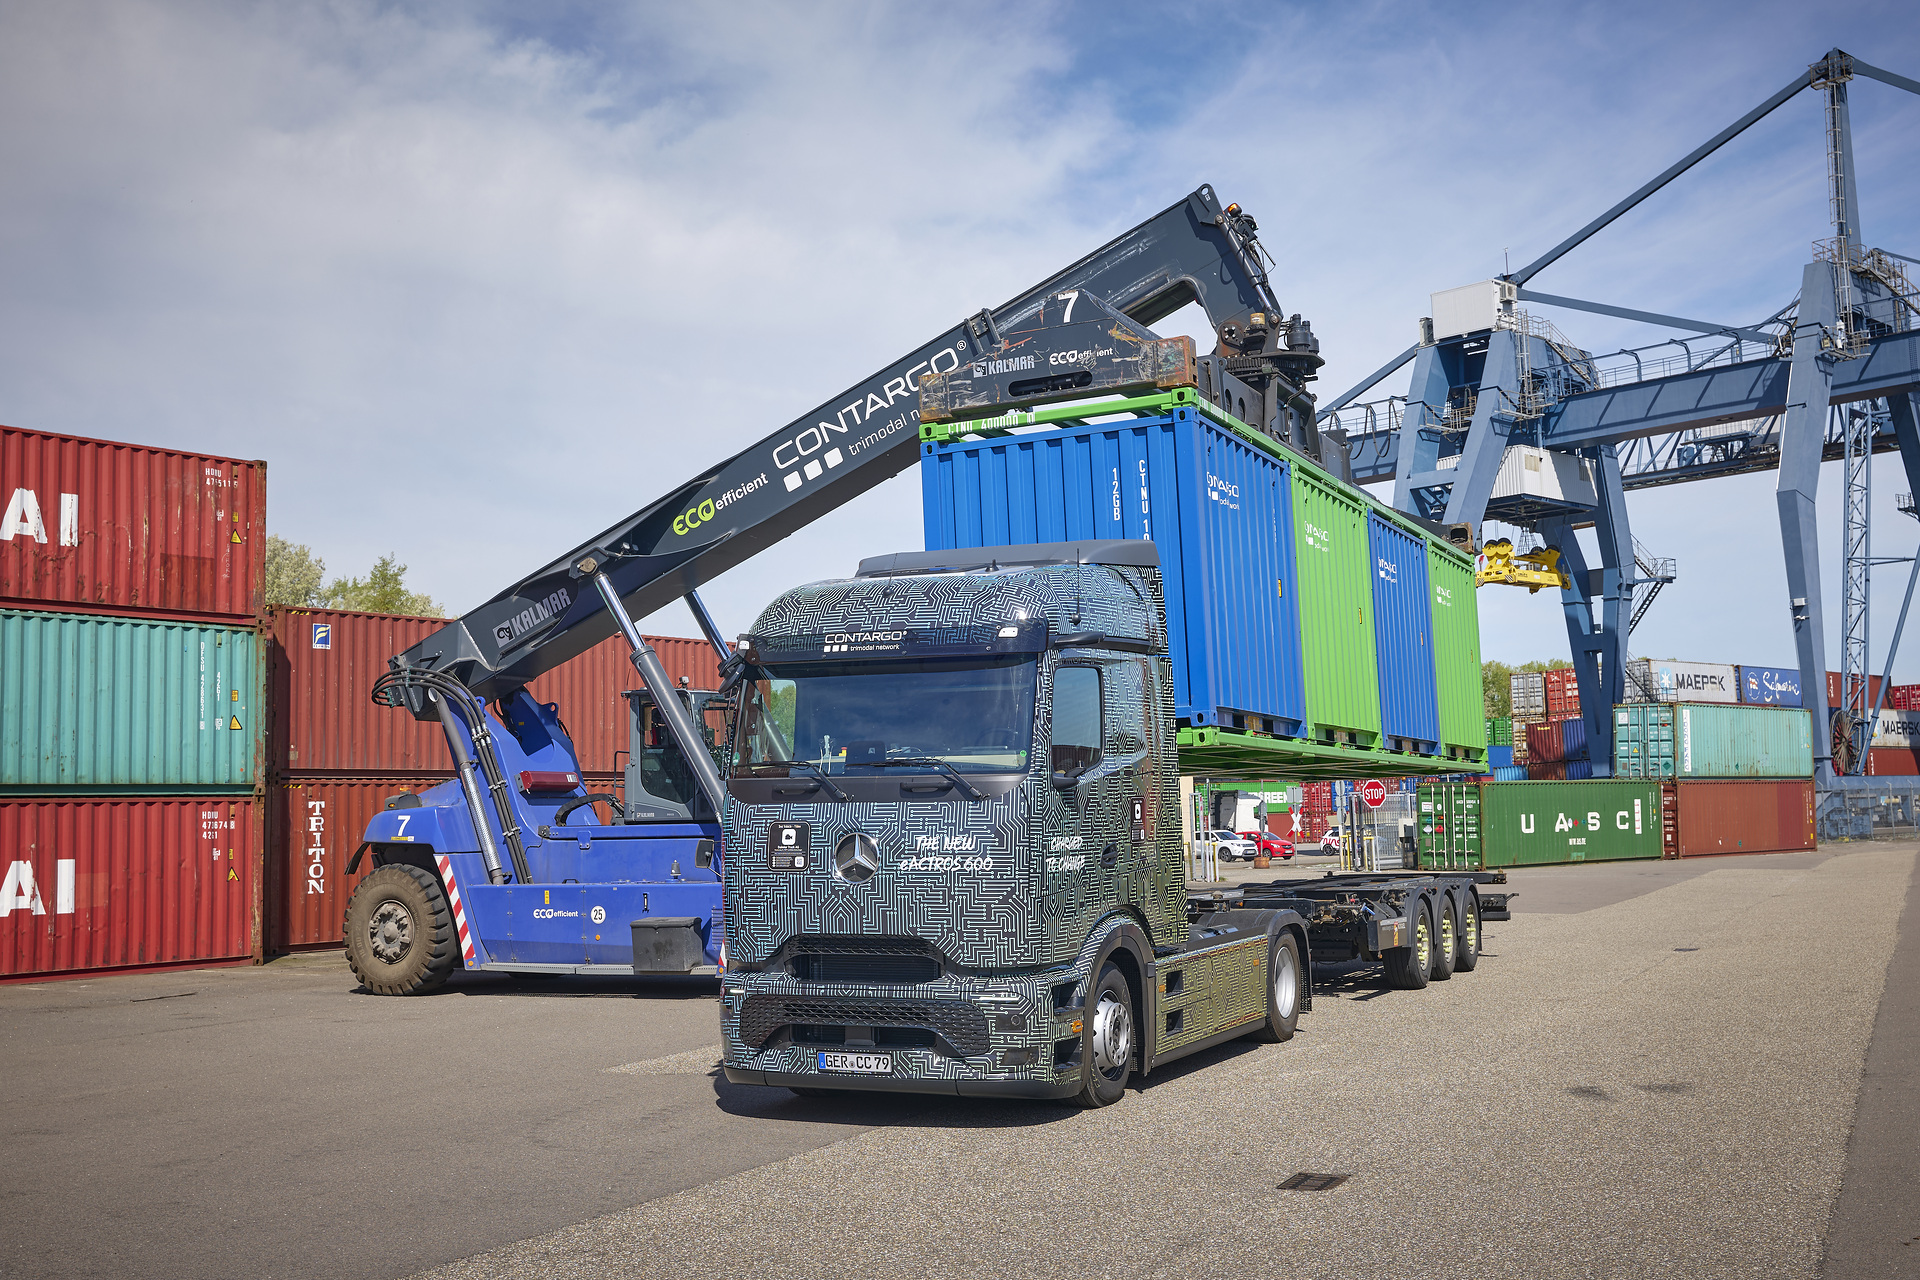 Start of eActros 600 customer testing – Contargo and Remondis take over first electric trucks